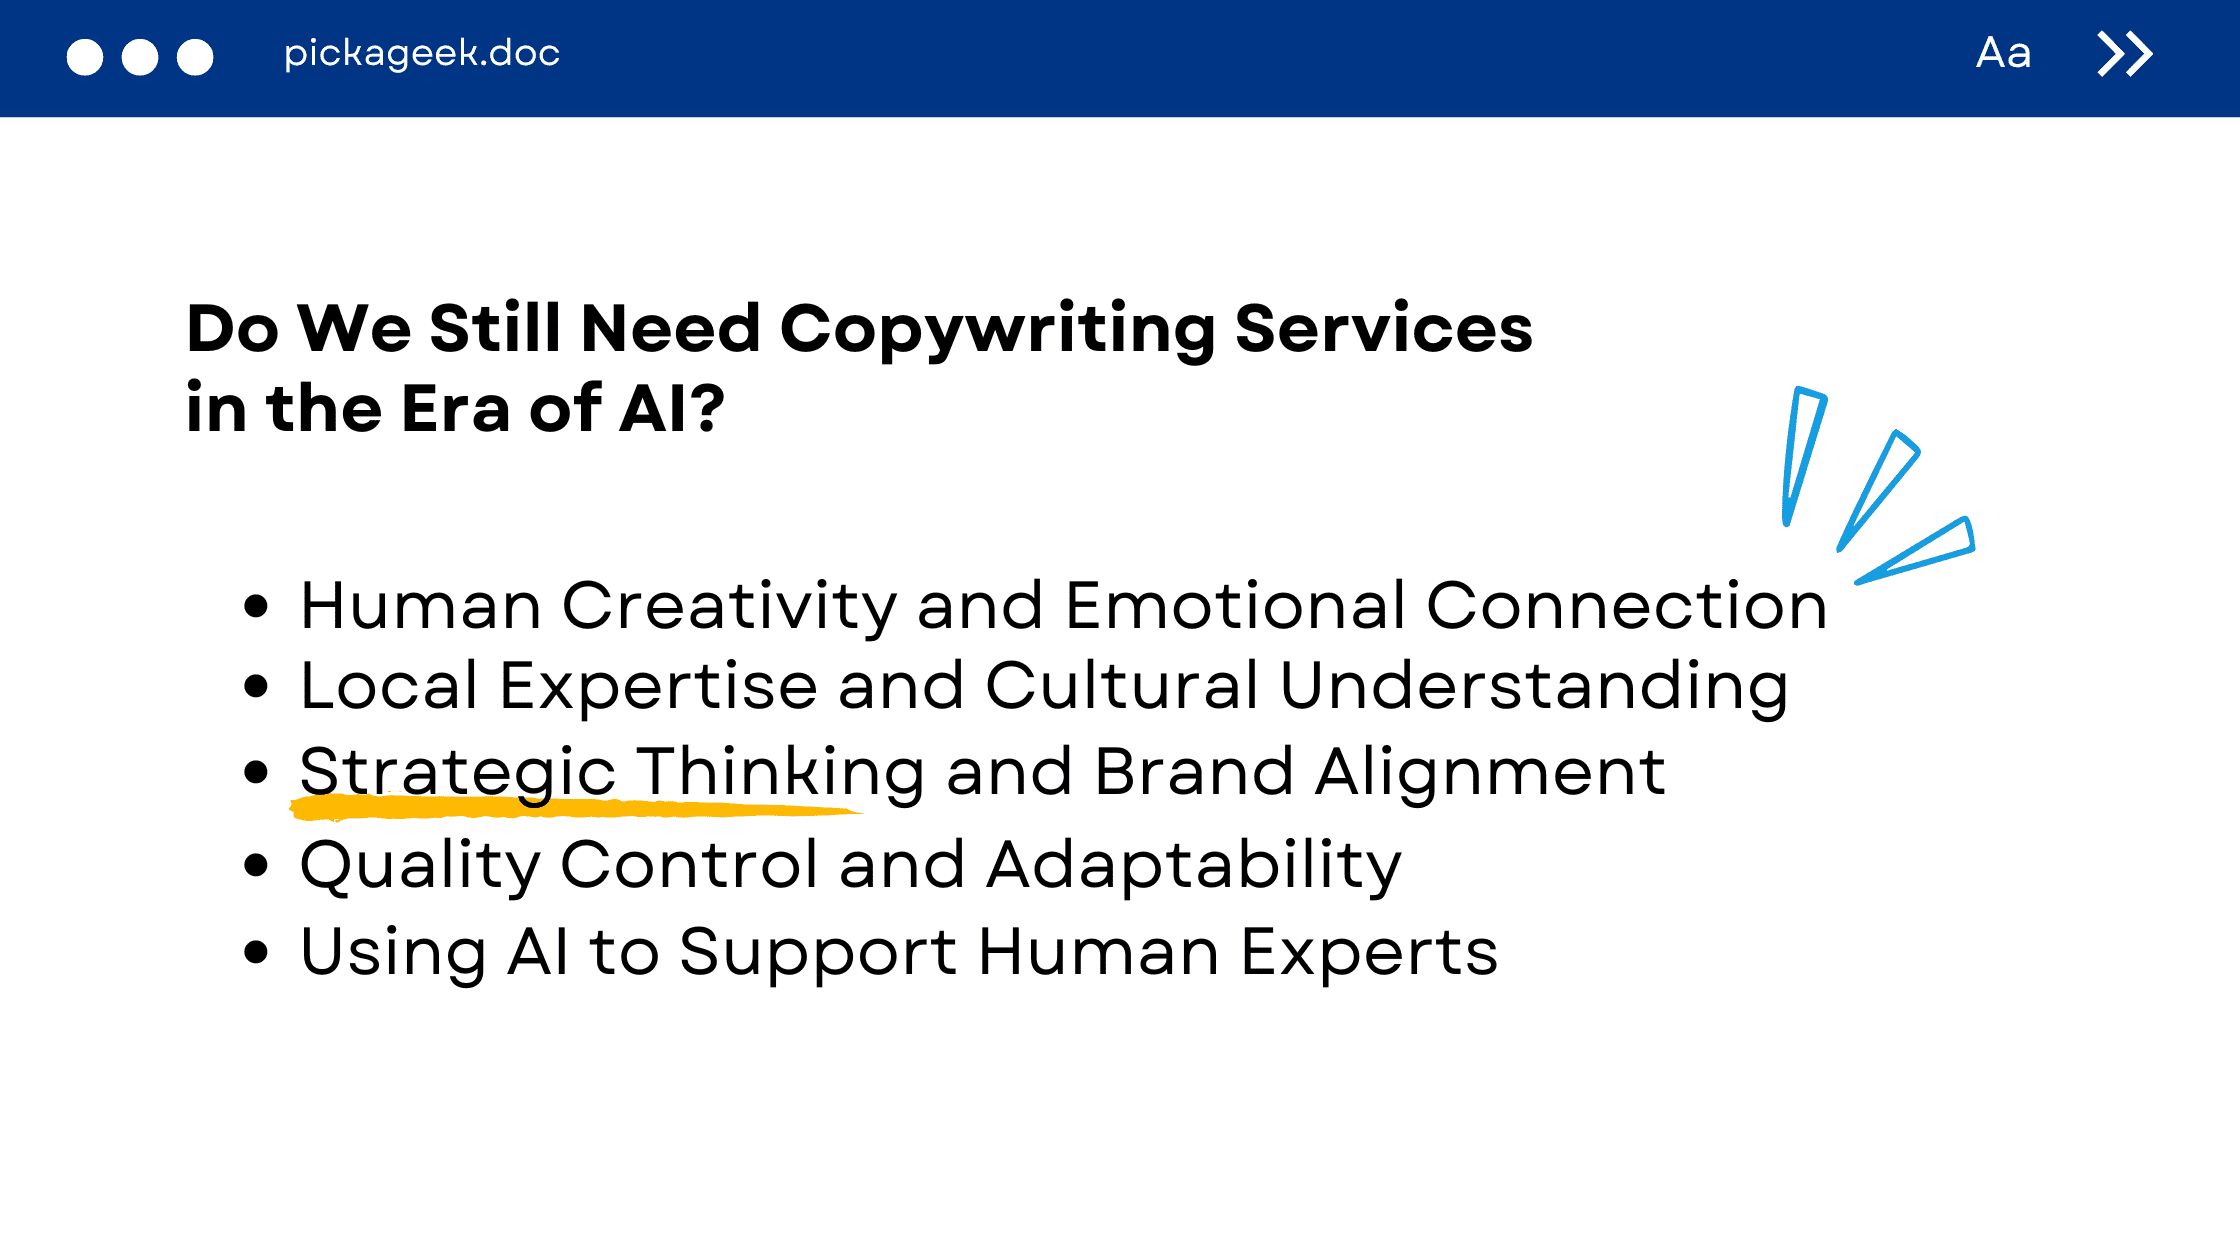 Do We Still Need Copywriting Services in the Era of AI?